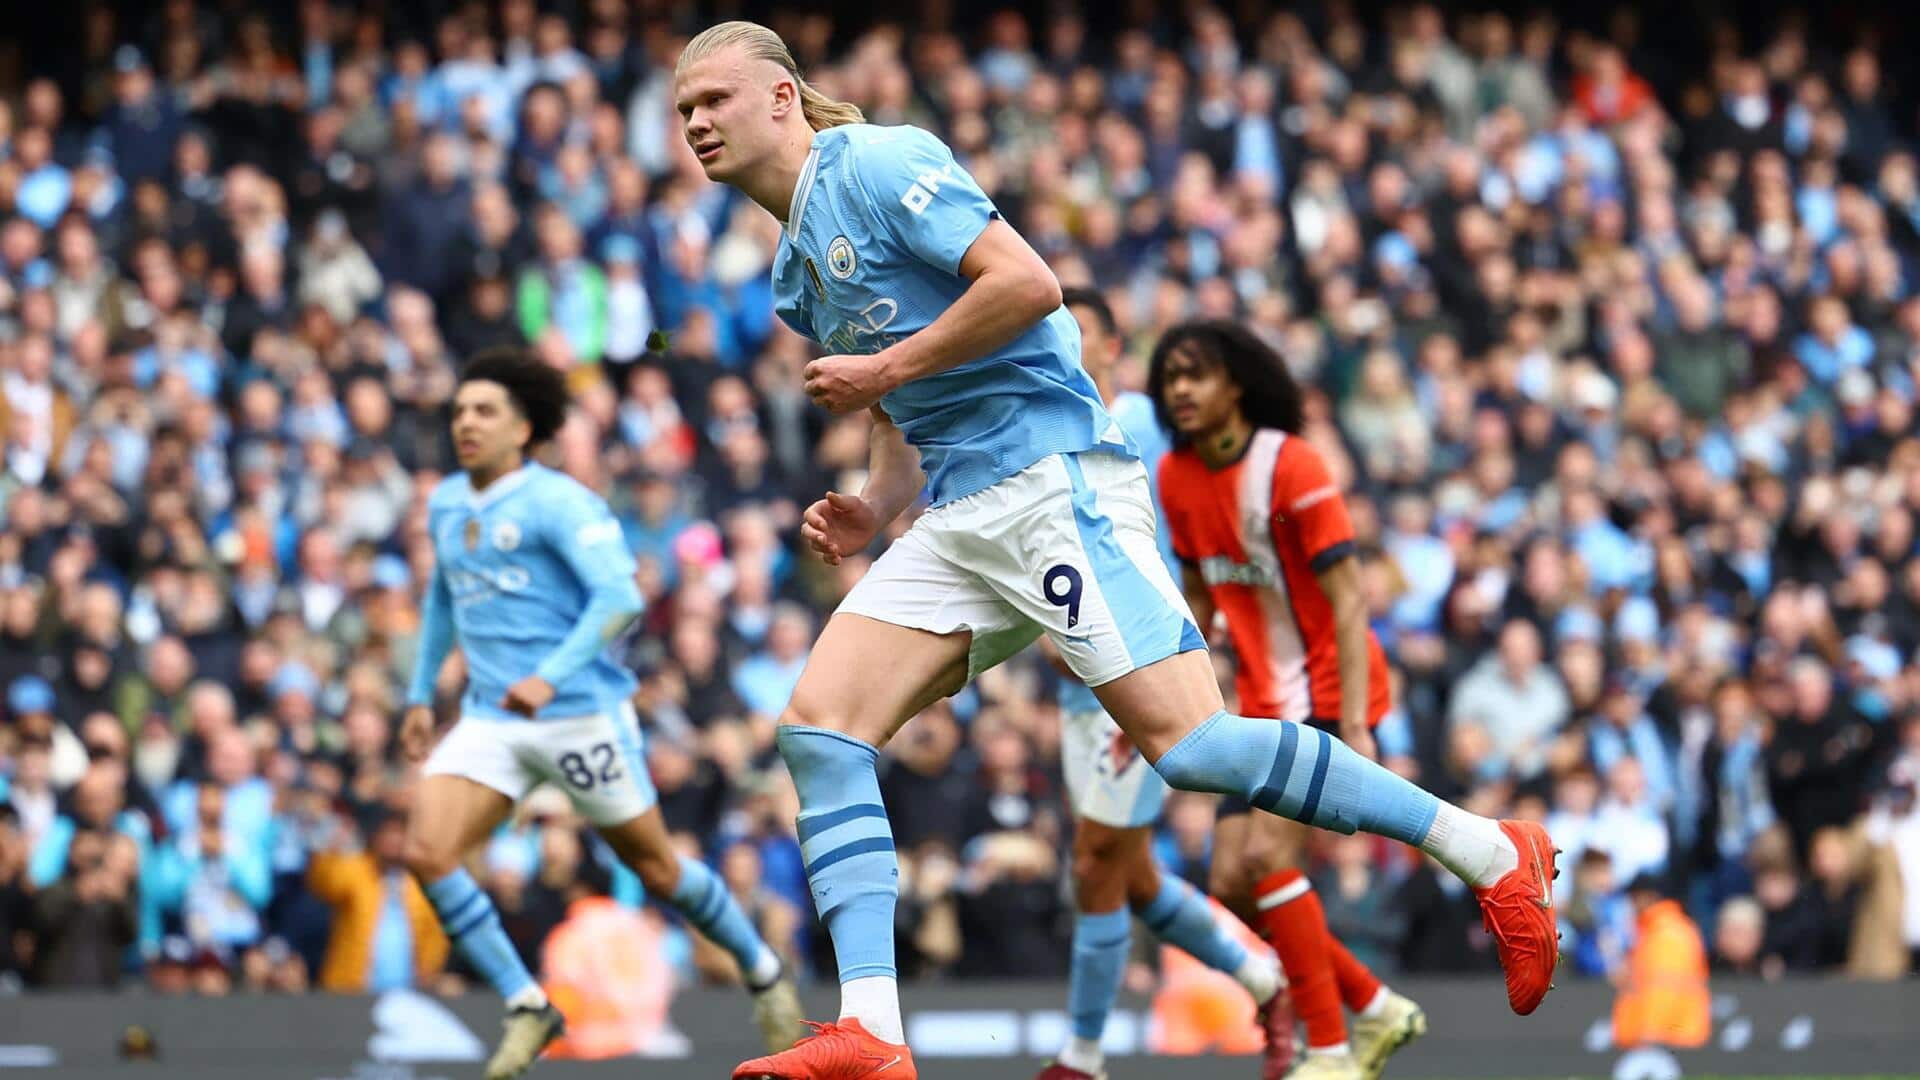 Manchester City overcome Luton Town 5-1 in Premier League: Stats